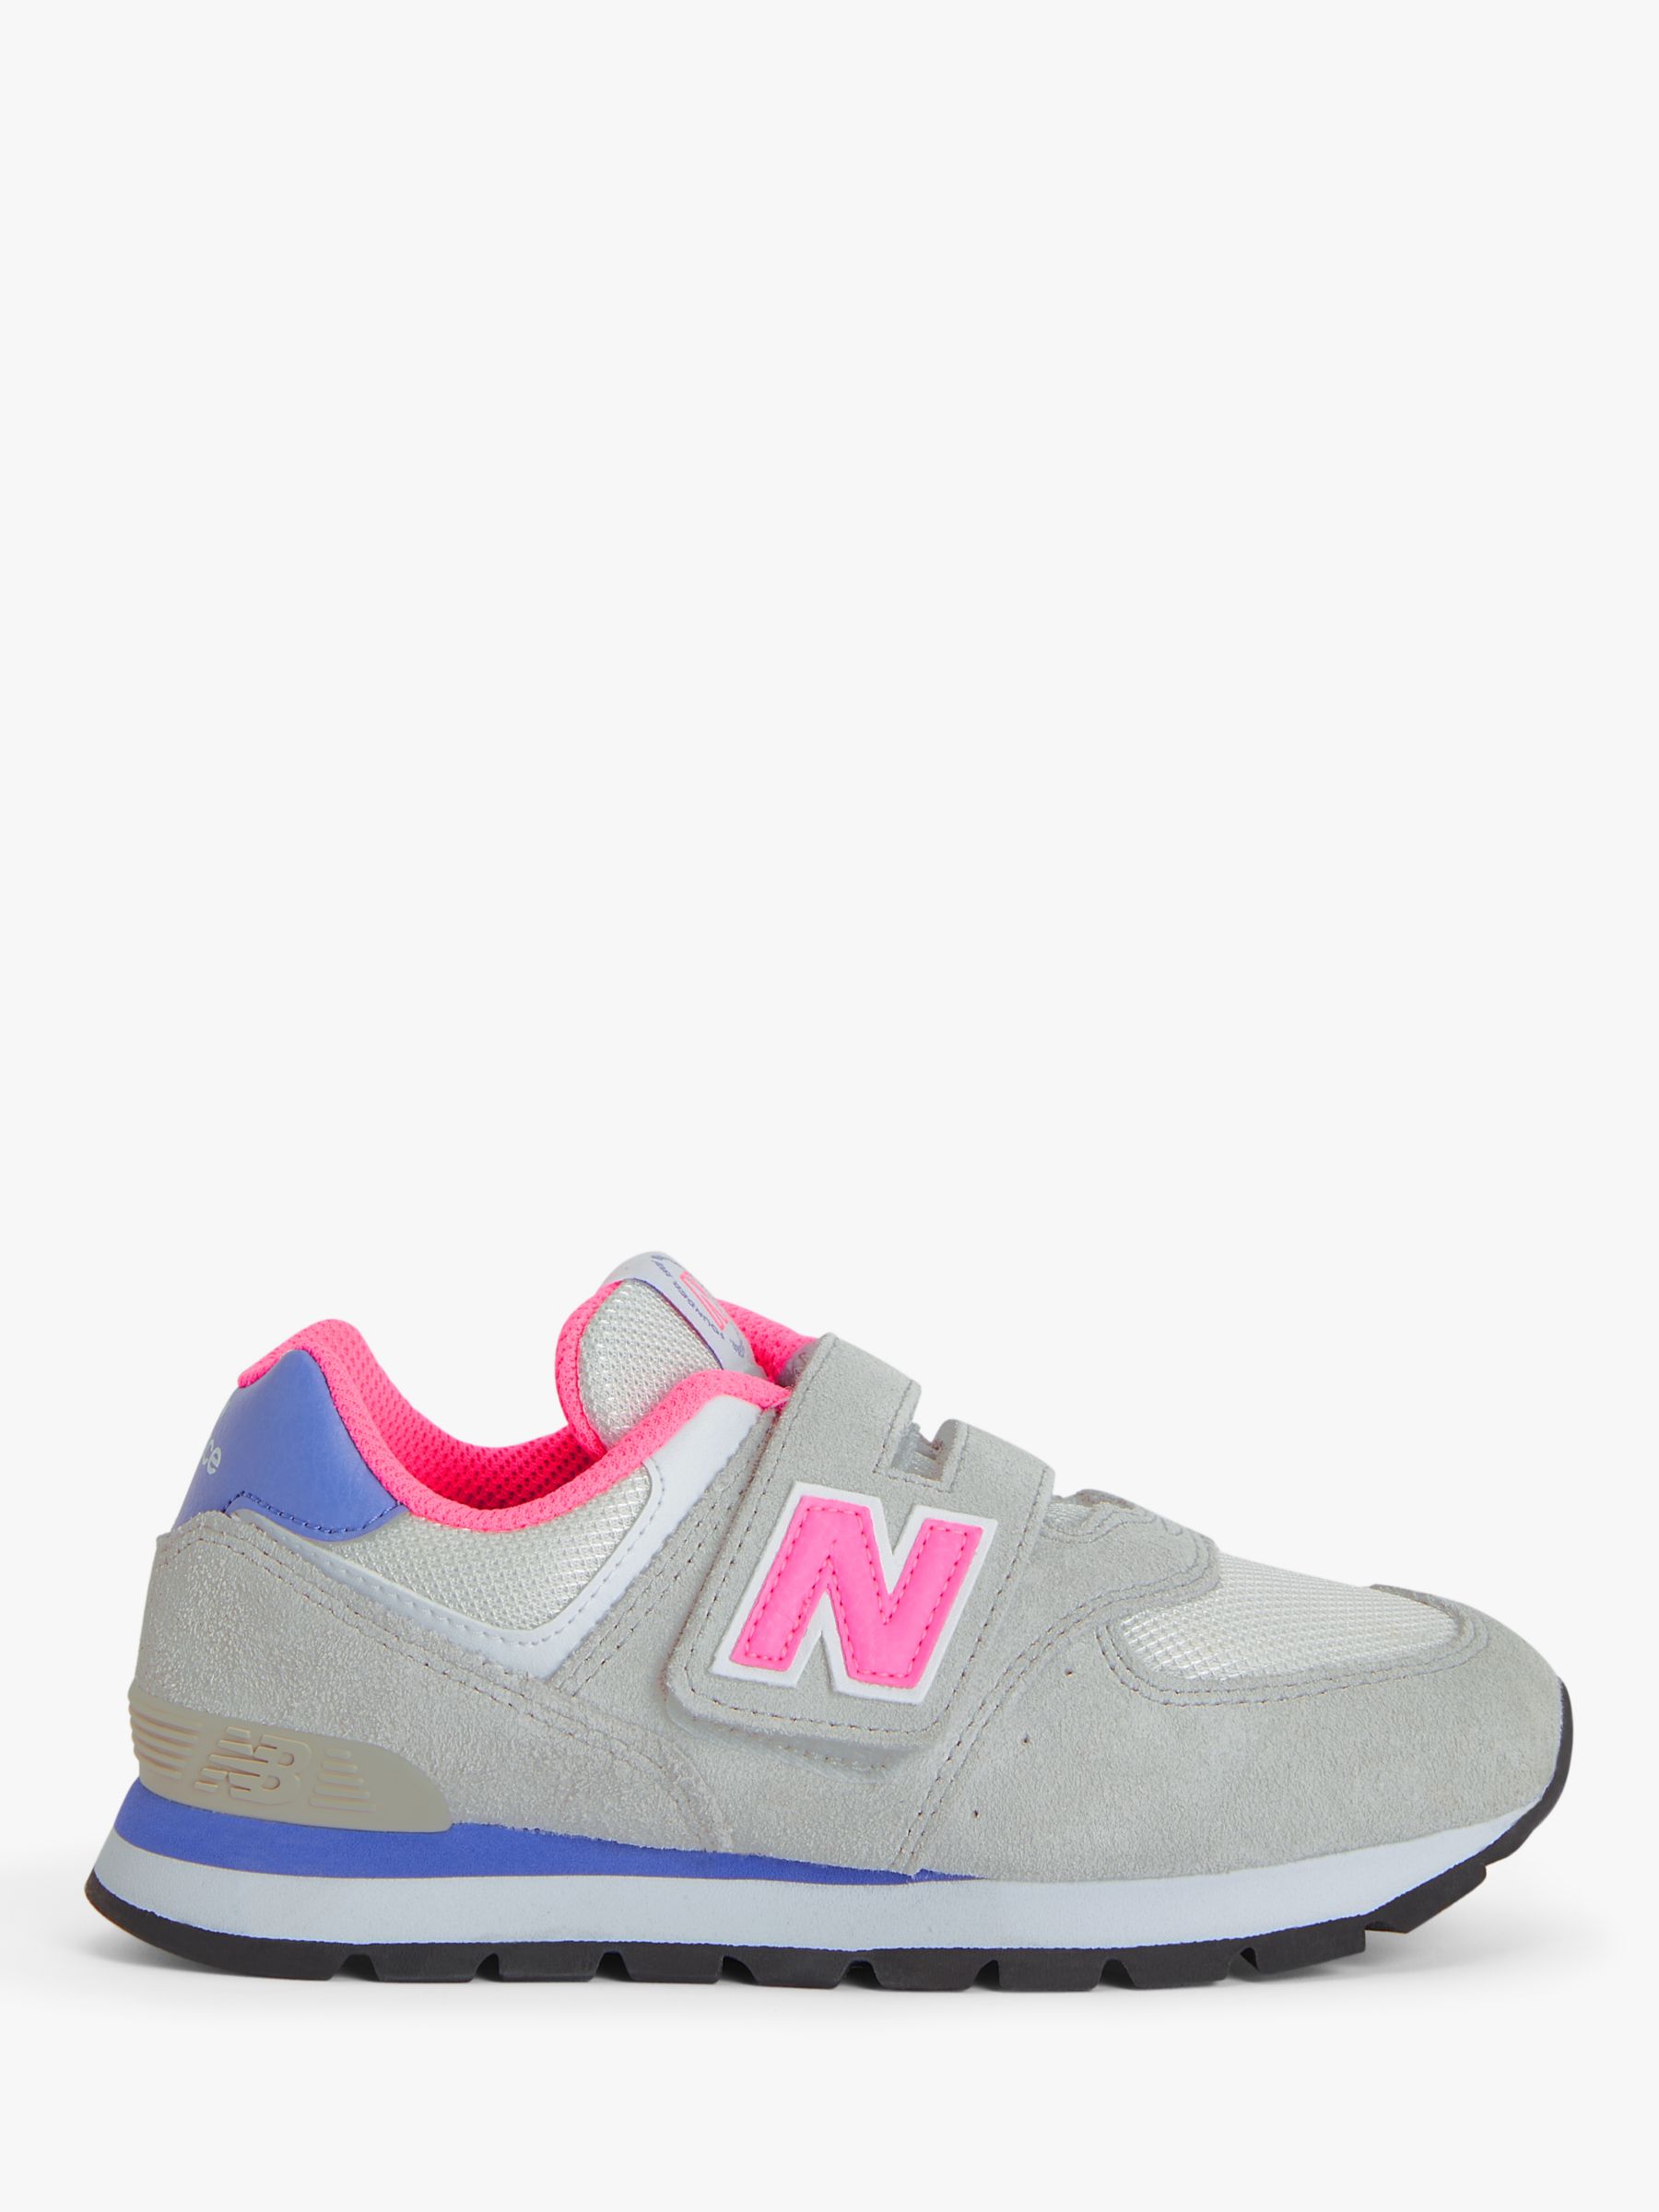 New Balance Kids' 574 Riptape Trainers, Fog/Neon Pink/Aura at Lewis &